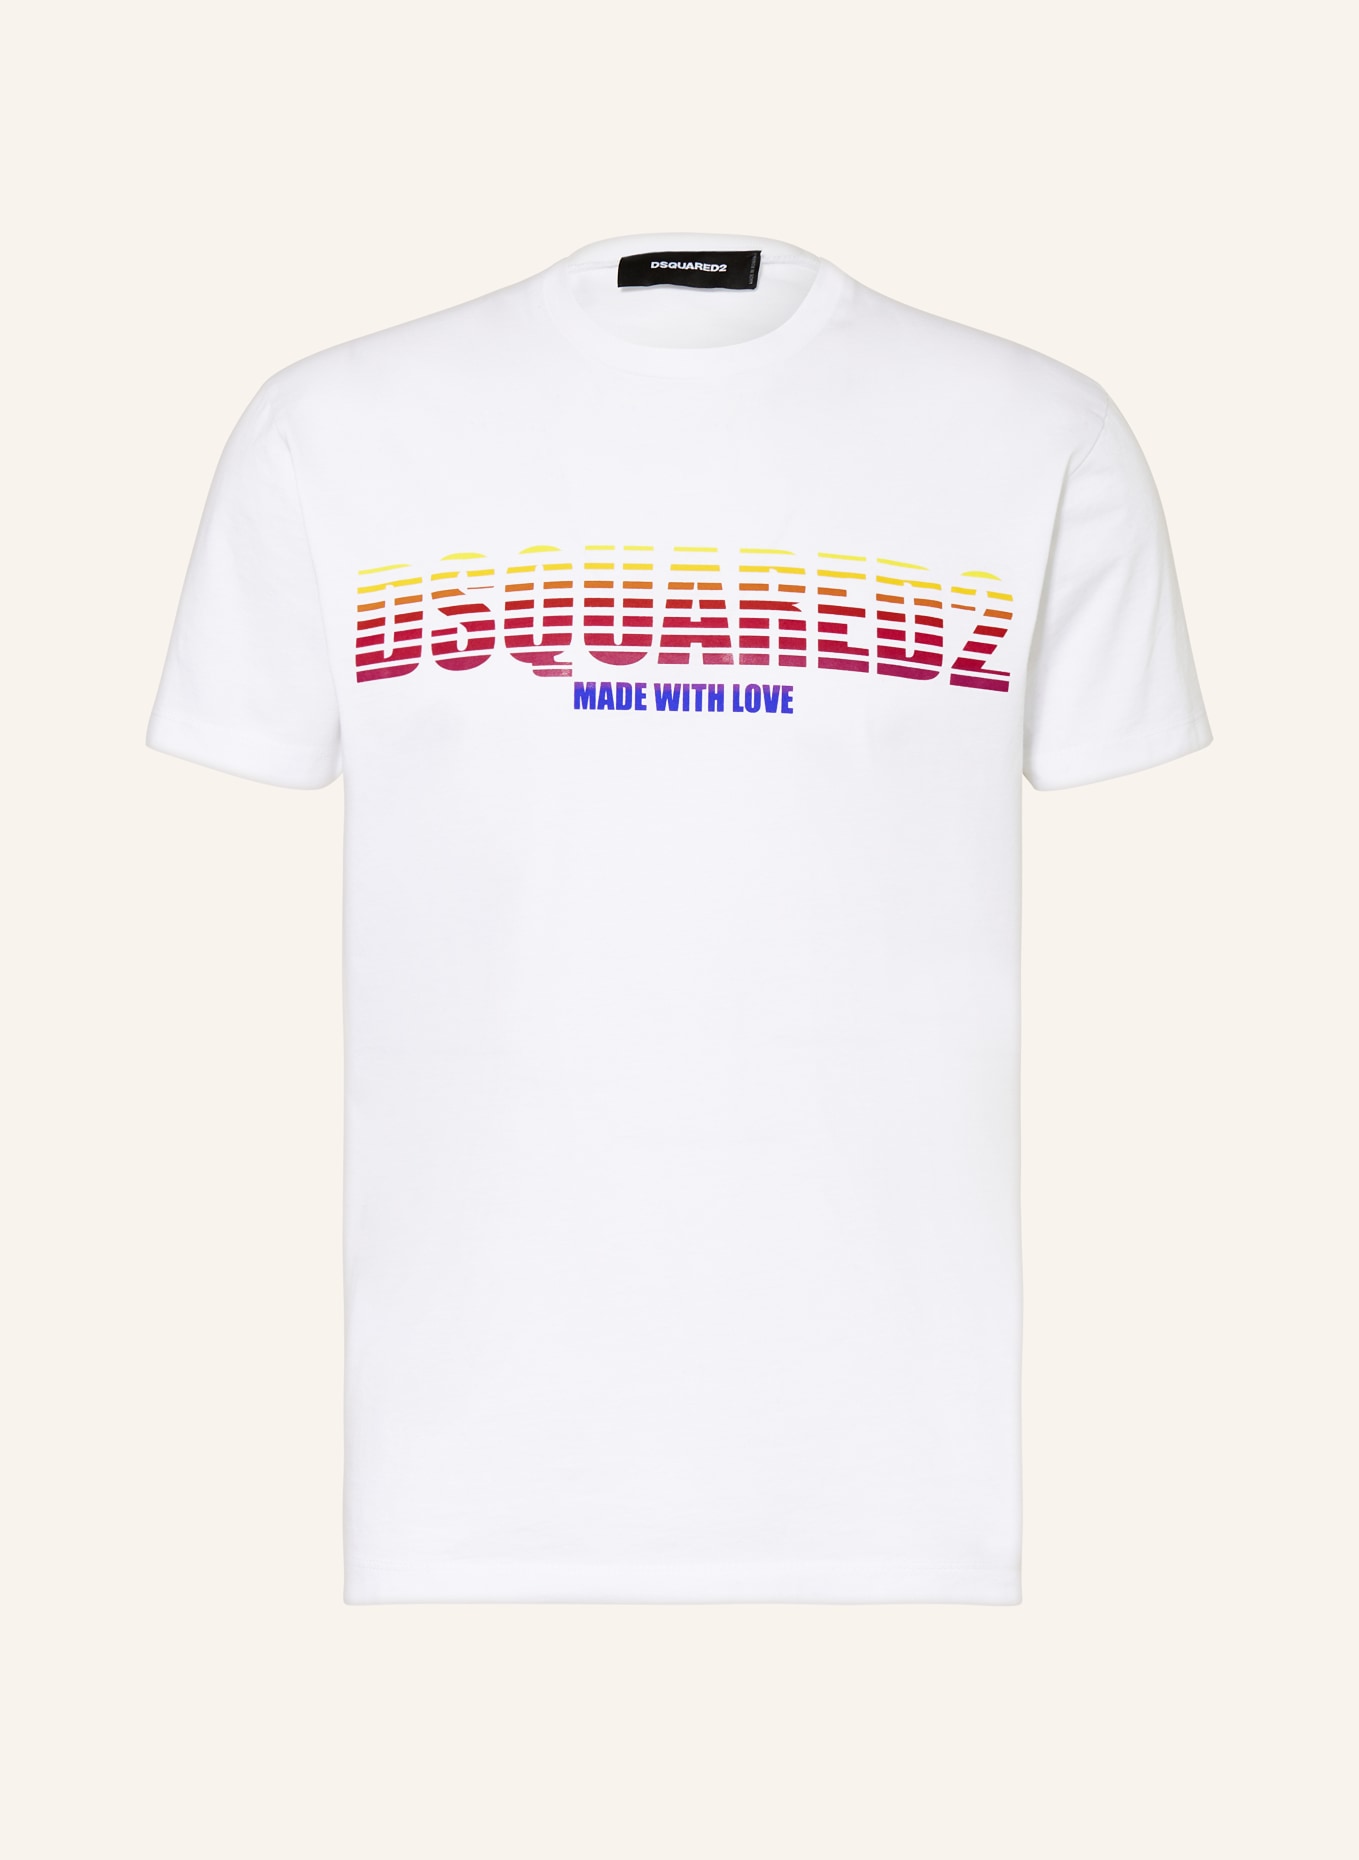 DSQUARED2 T-shirt COOL FIT DS2 MADE WITH LOVE, Kolor: BIAŁY (Obrazek 1)